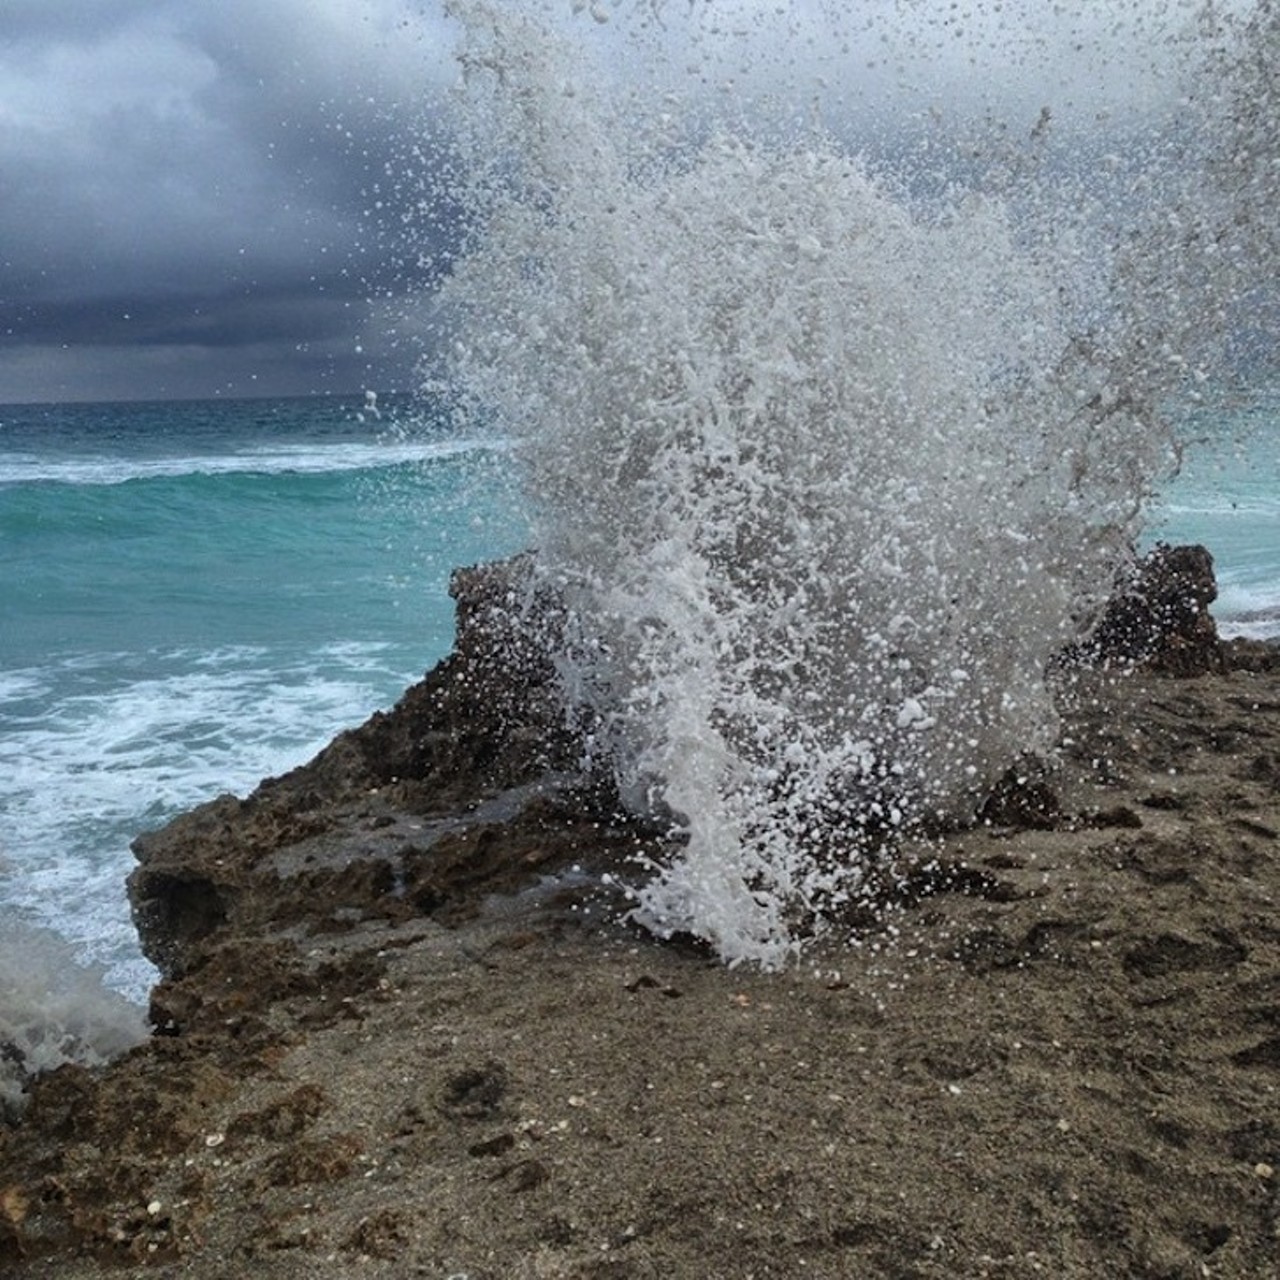 Blowing Rocks Preserve
SPLOOOOOOOSH! Gusts of water spurt out of rock formations during high tide, so get the camera ready for the water blast. It ain't a bad spot for snorkeling, either. There be schools of tropical fish and sea turtles here.
2 hours and 28 minutes
Photo via dare_to_believe_/Instagram